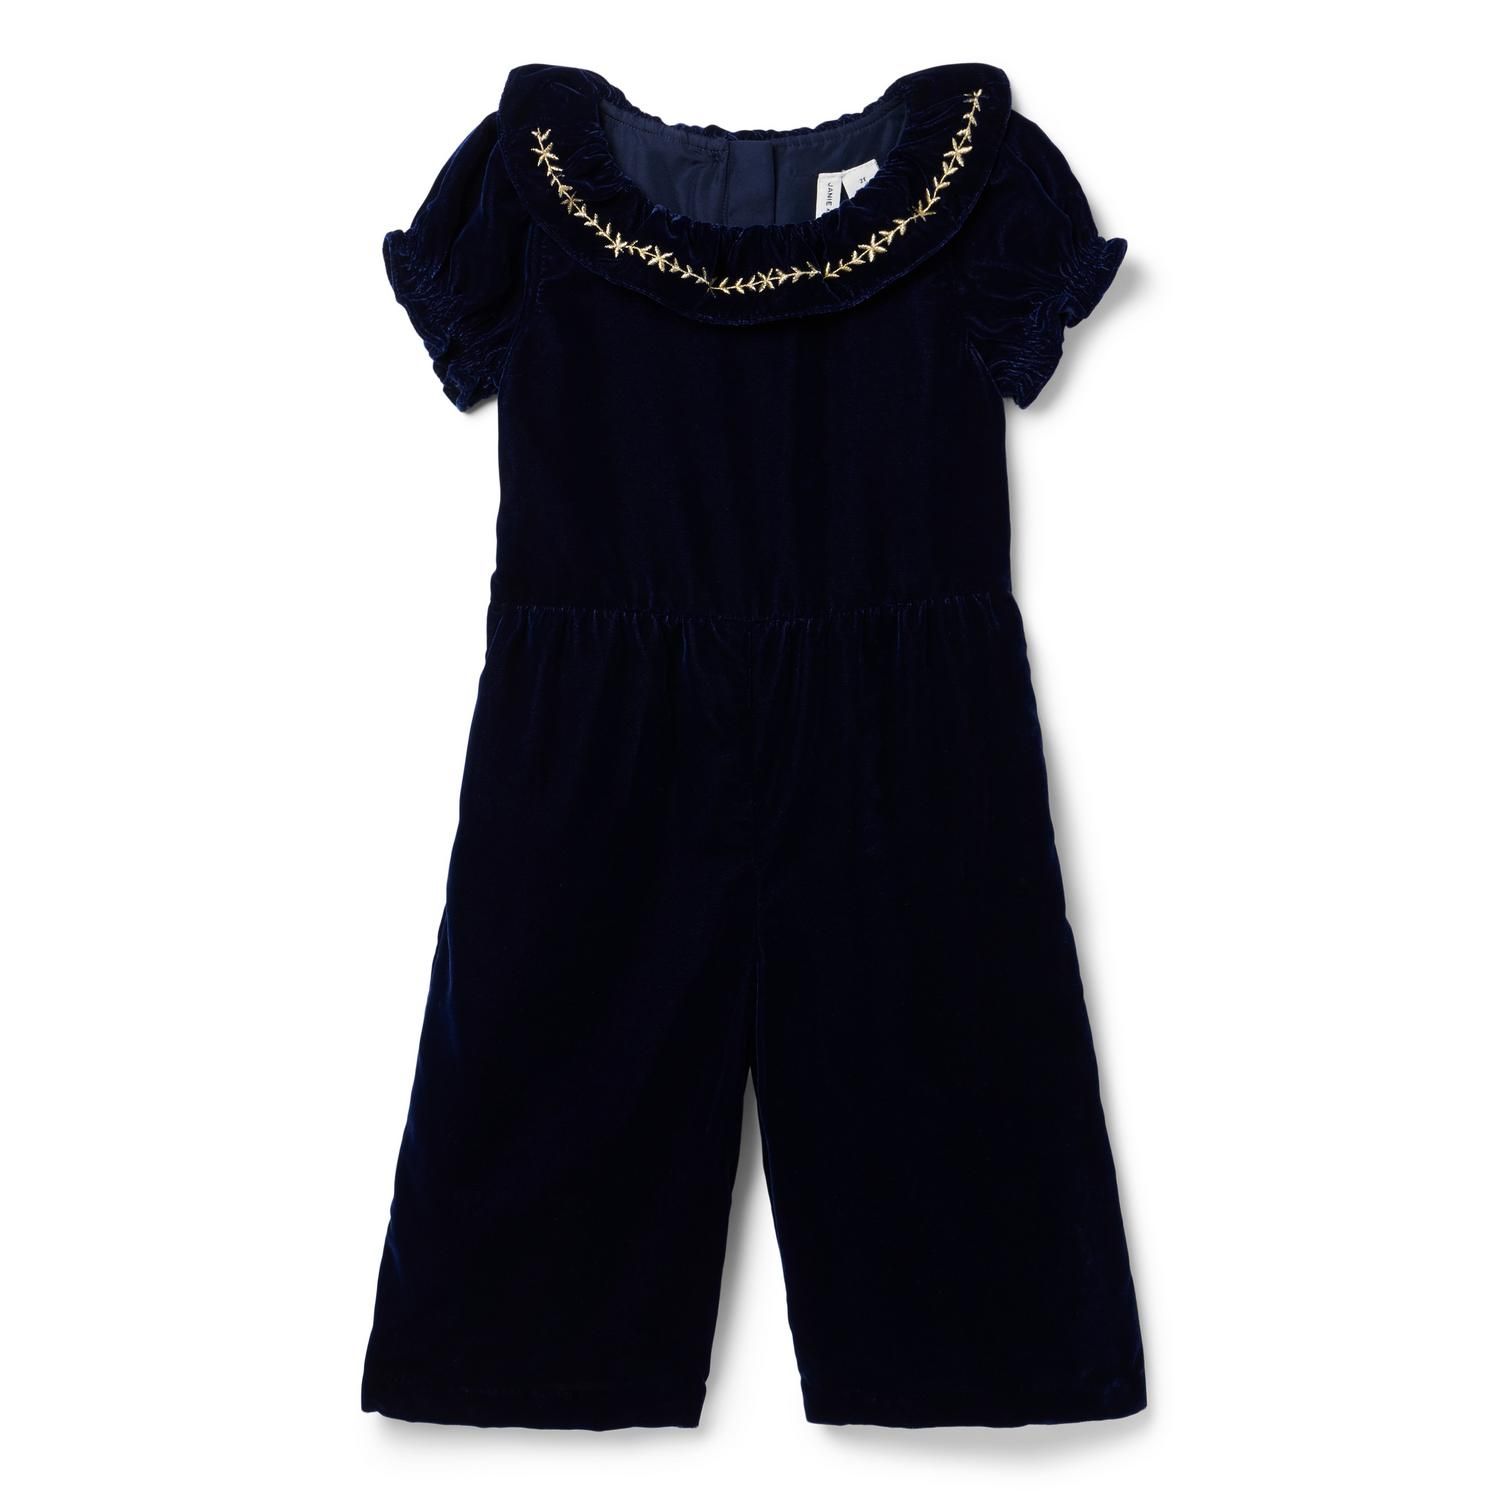 The Velvet Party Jumpsuit | Janie and Jack